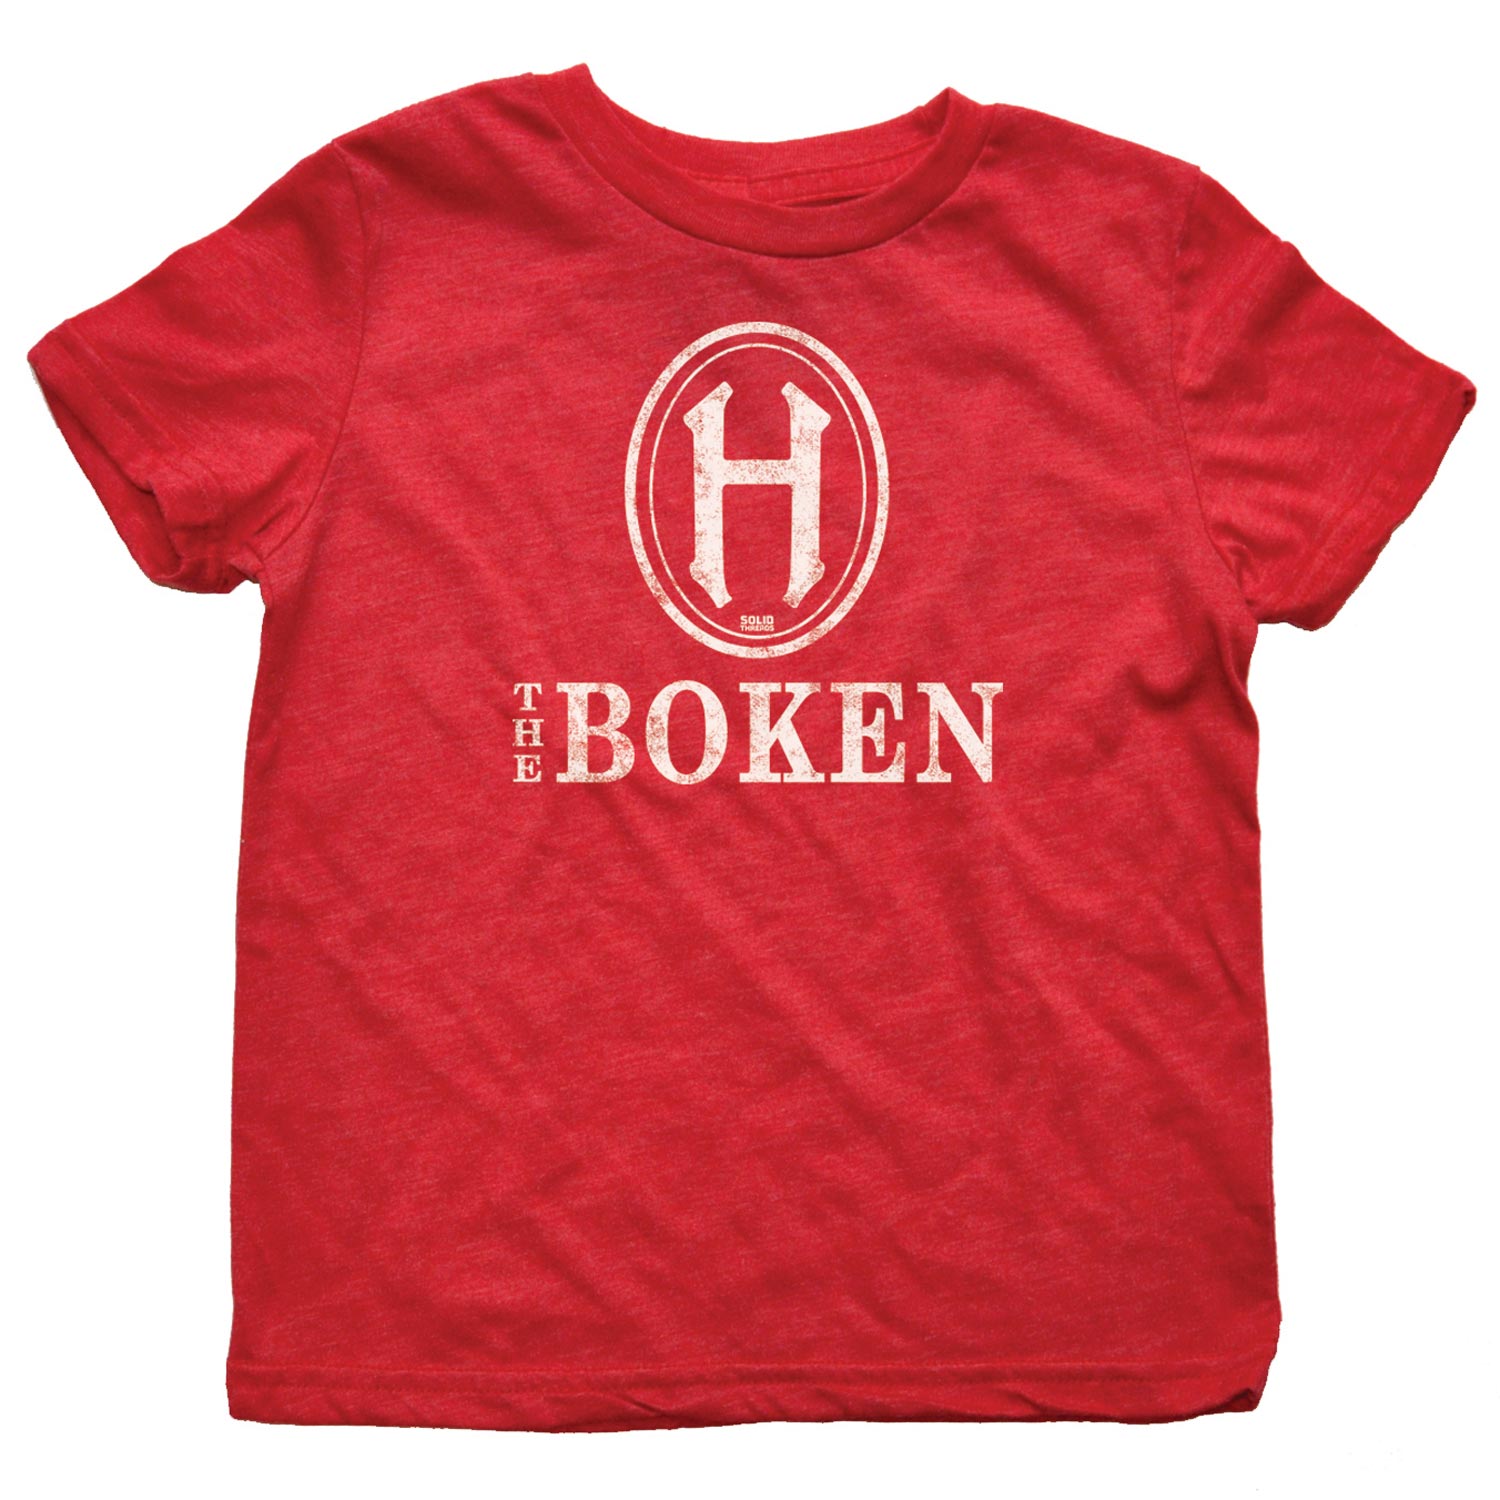 Kids The Boken Cool New Jersey Graphic T-Shirt | Cute Retro Garden State Red Tee | Solid Threads